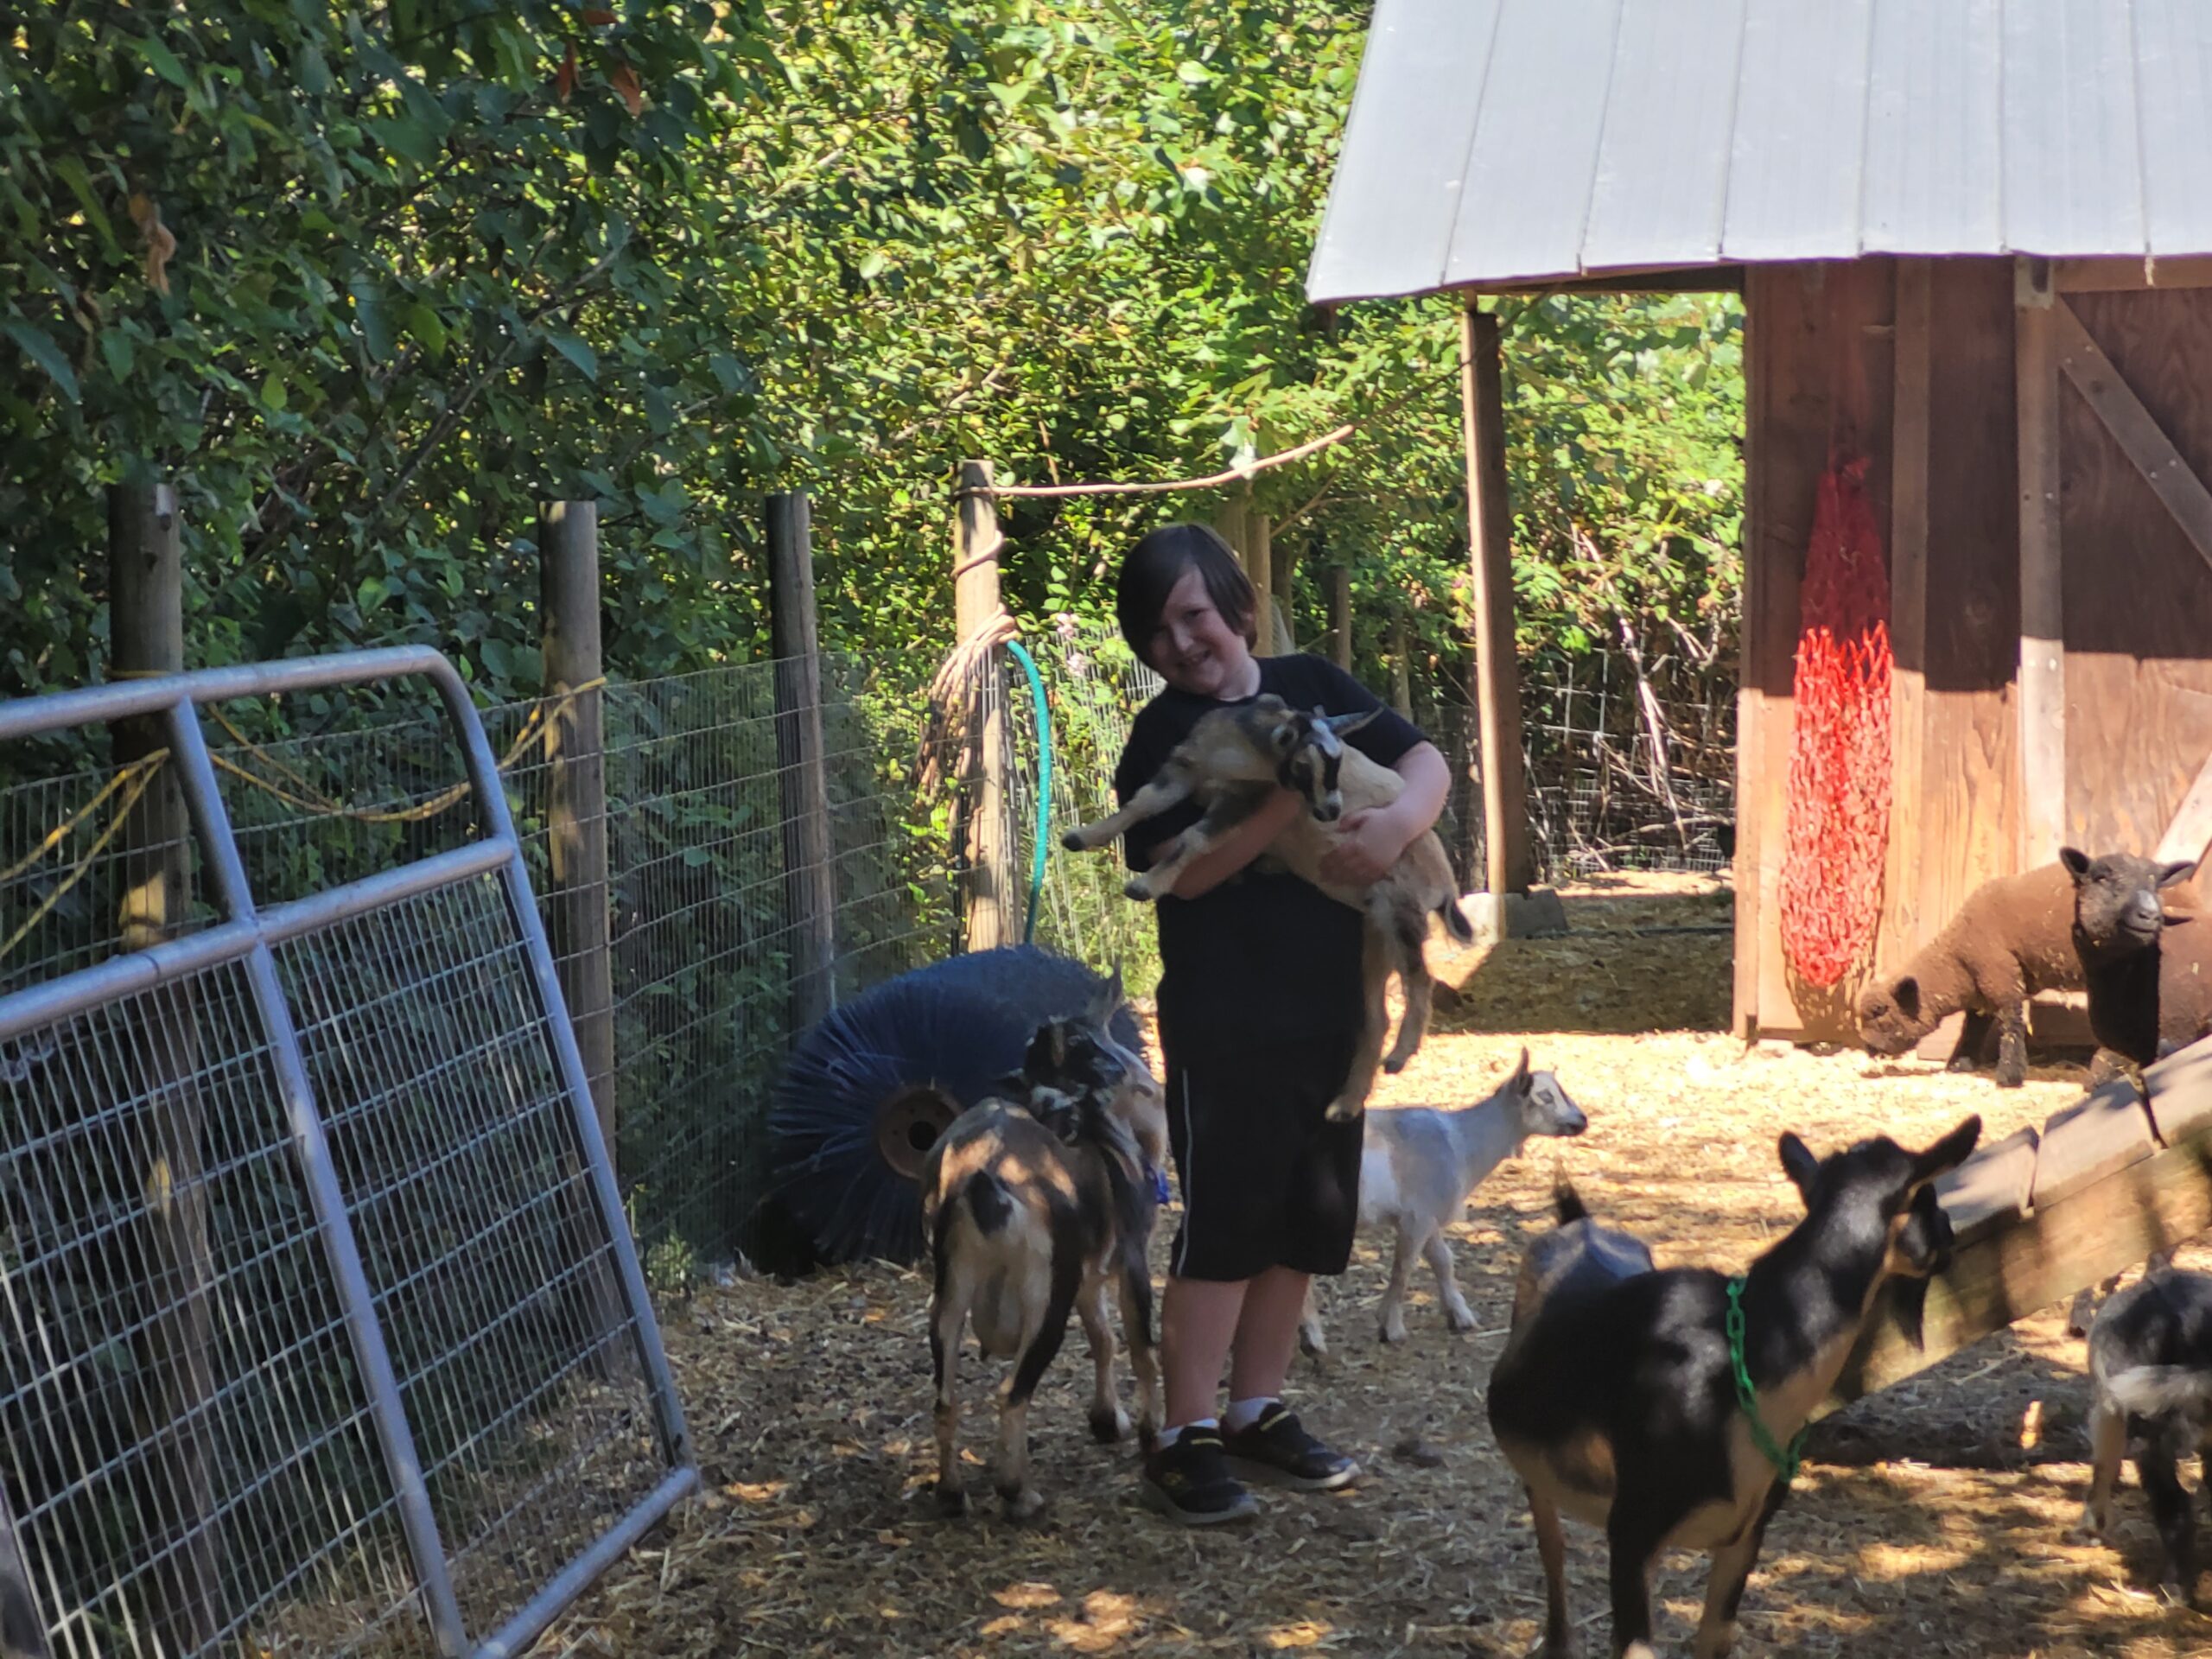 Alex and a baby goat are centred in a picture, surrounded by goats